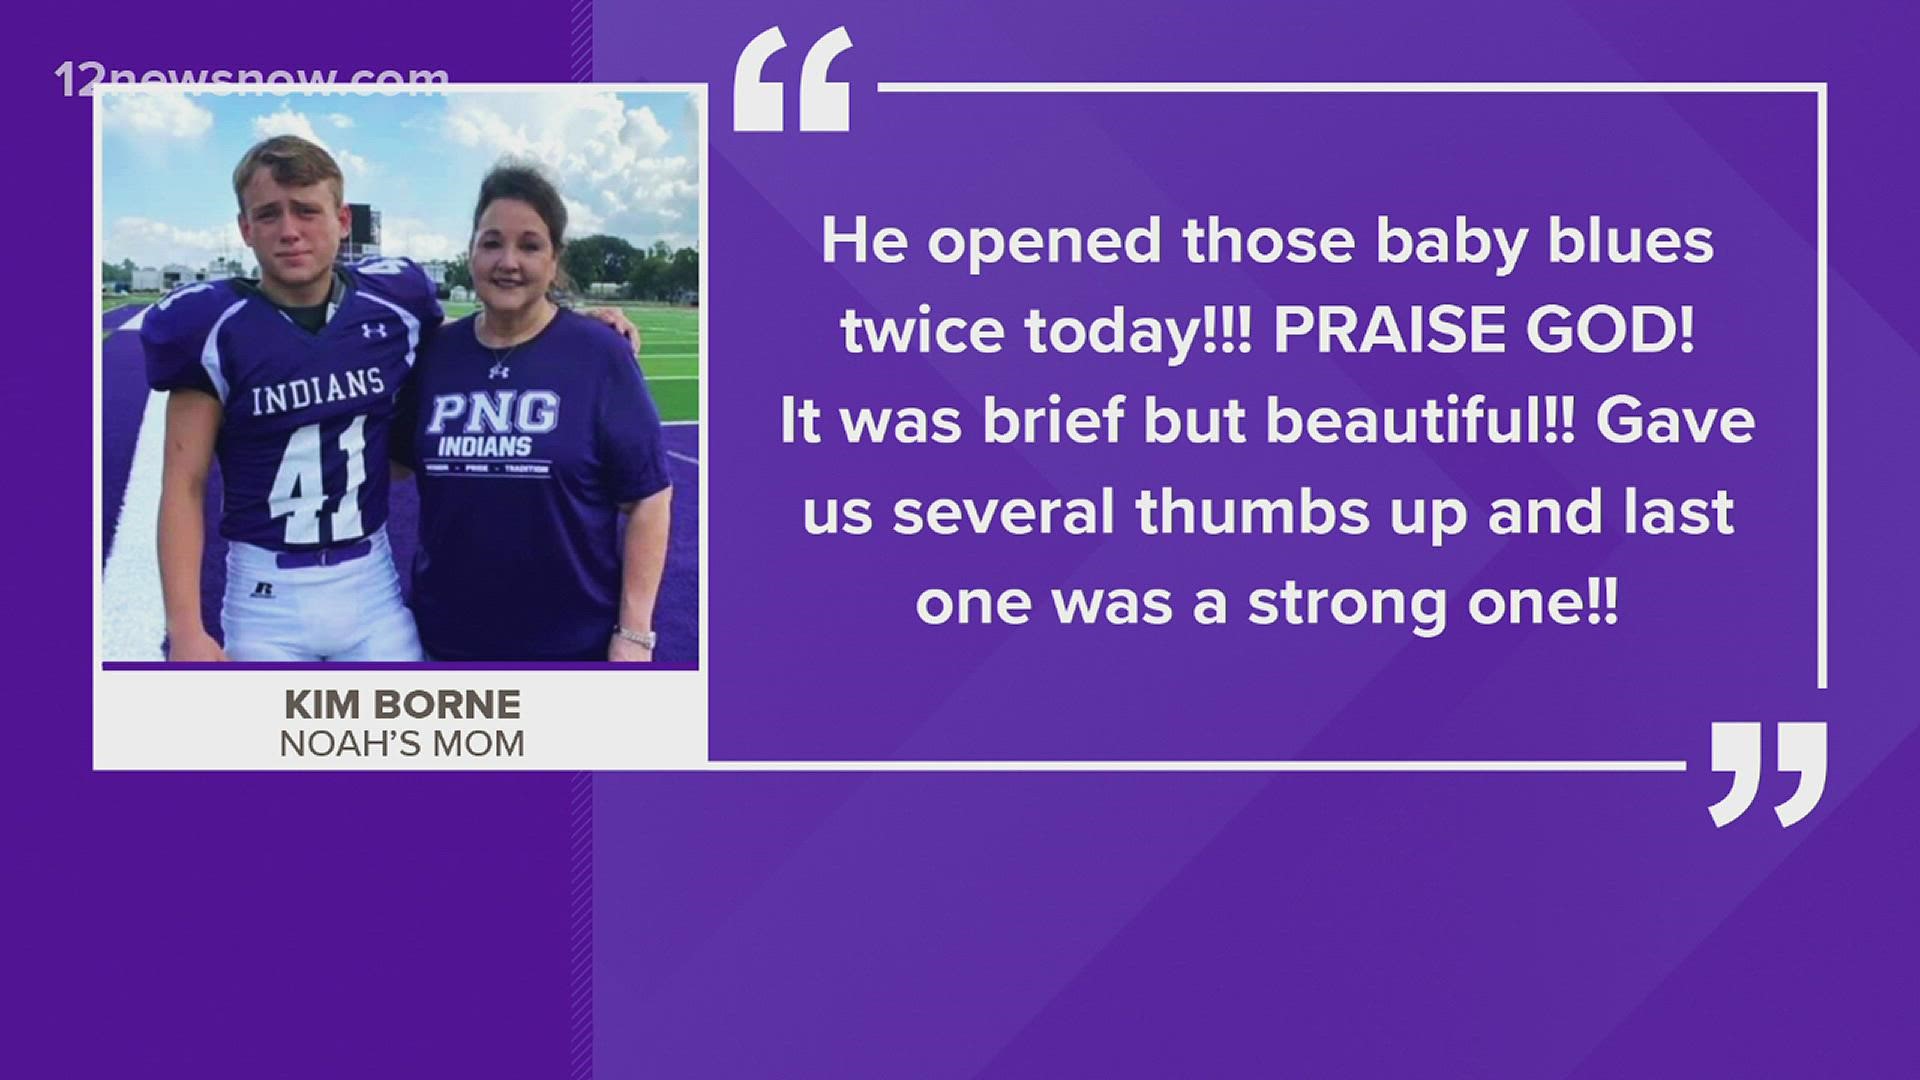 Noah Jackson has been in a medically induced coma at Texas Children's hospital.